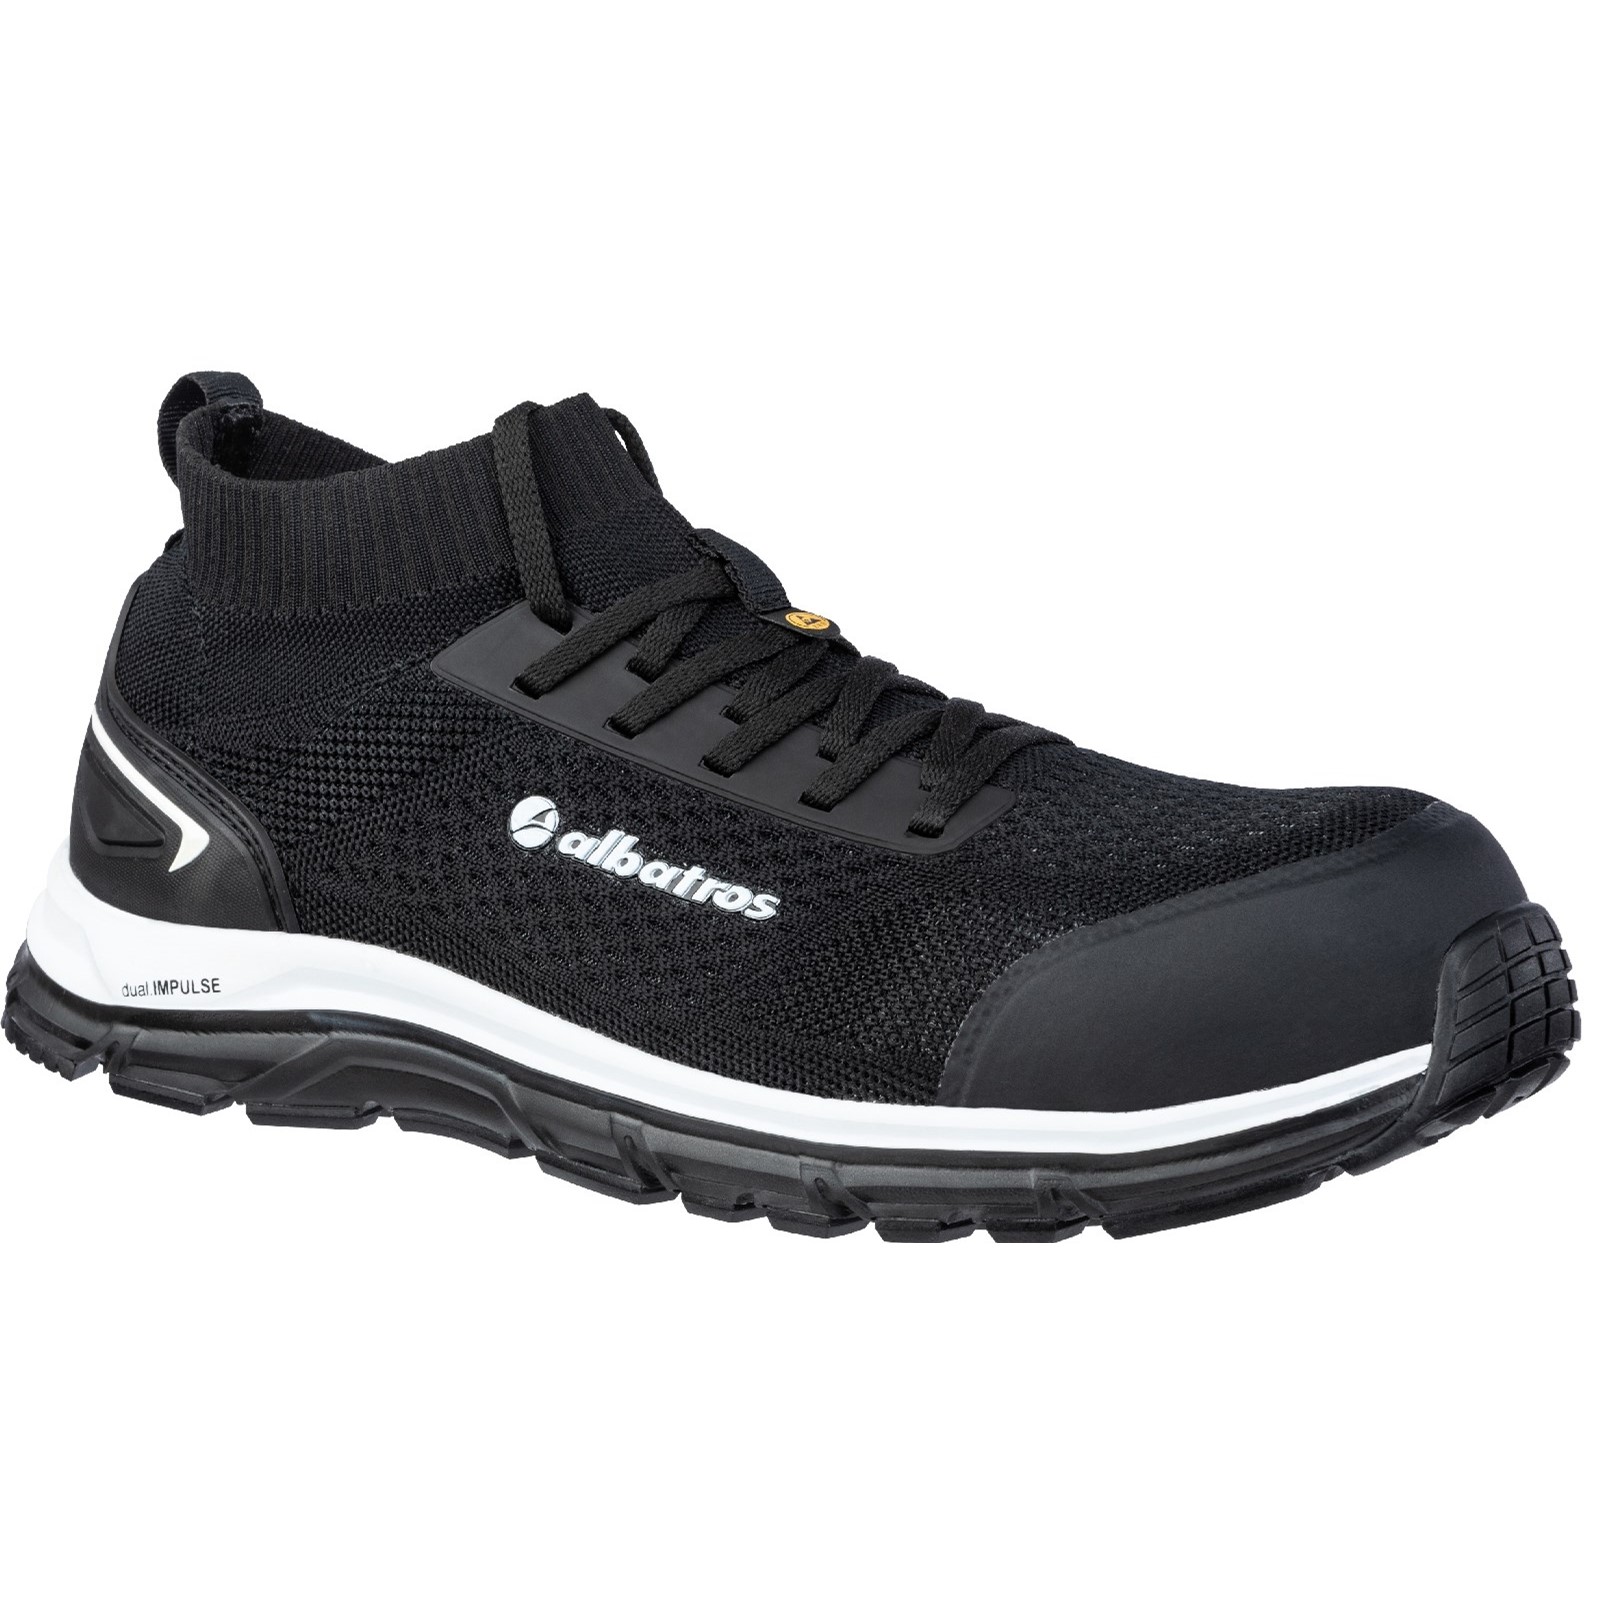 Ultimate Impulse Low Lace Up Safety Shoe